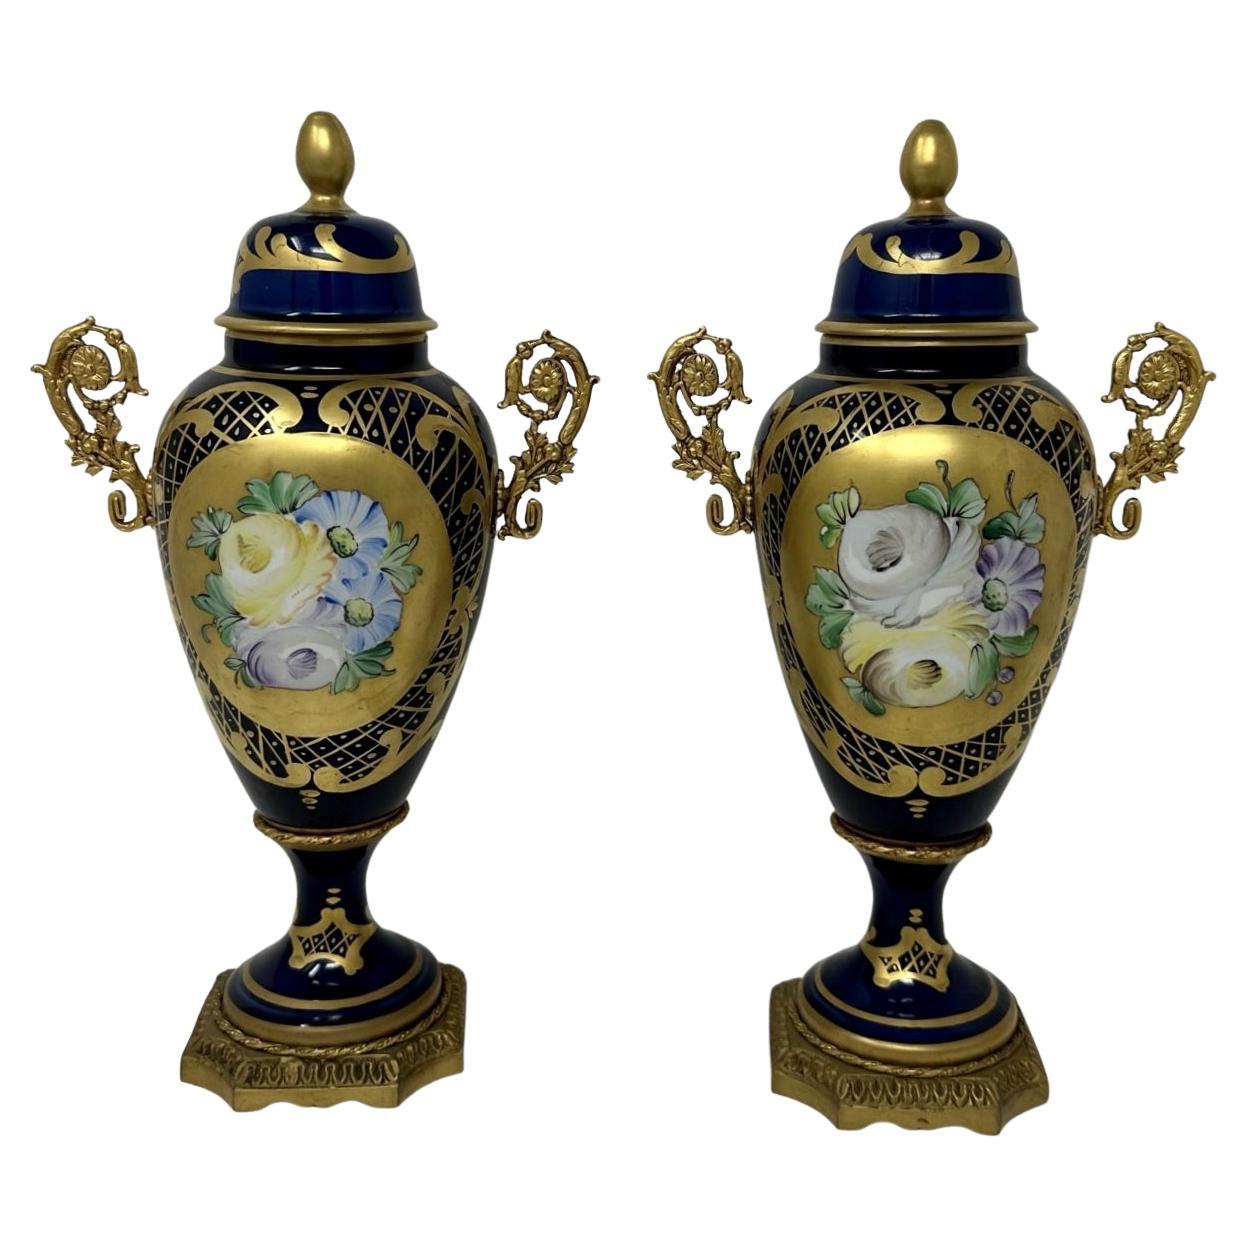 Antique Pair of French Limoges Porcelain Ormolu Mounted Urns Vases Centerpieces